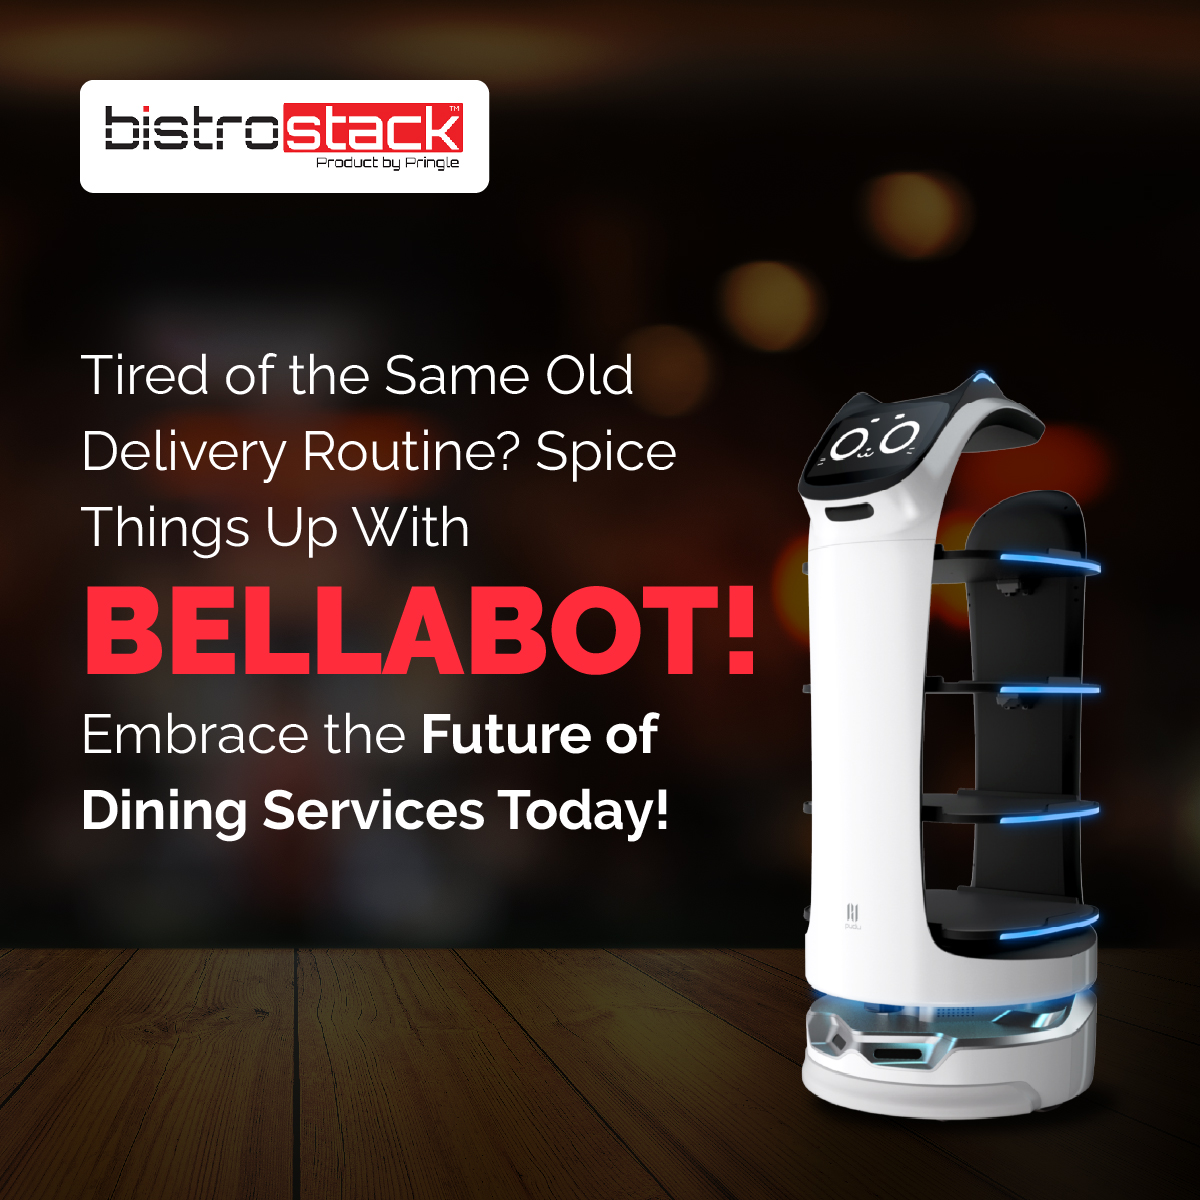 Are you tired of the same old delivery routine? It's time to embrace the future of dining services with BellaBoT. Elevate your dining experience today and savor the difference.

#SmartDelivery #RobotDelivery #FoodDeliveryRobot #ContactlessDelivery #BellaBoT #BistroStack